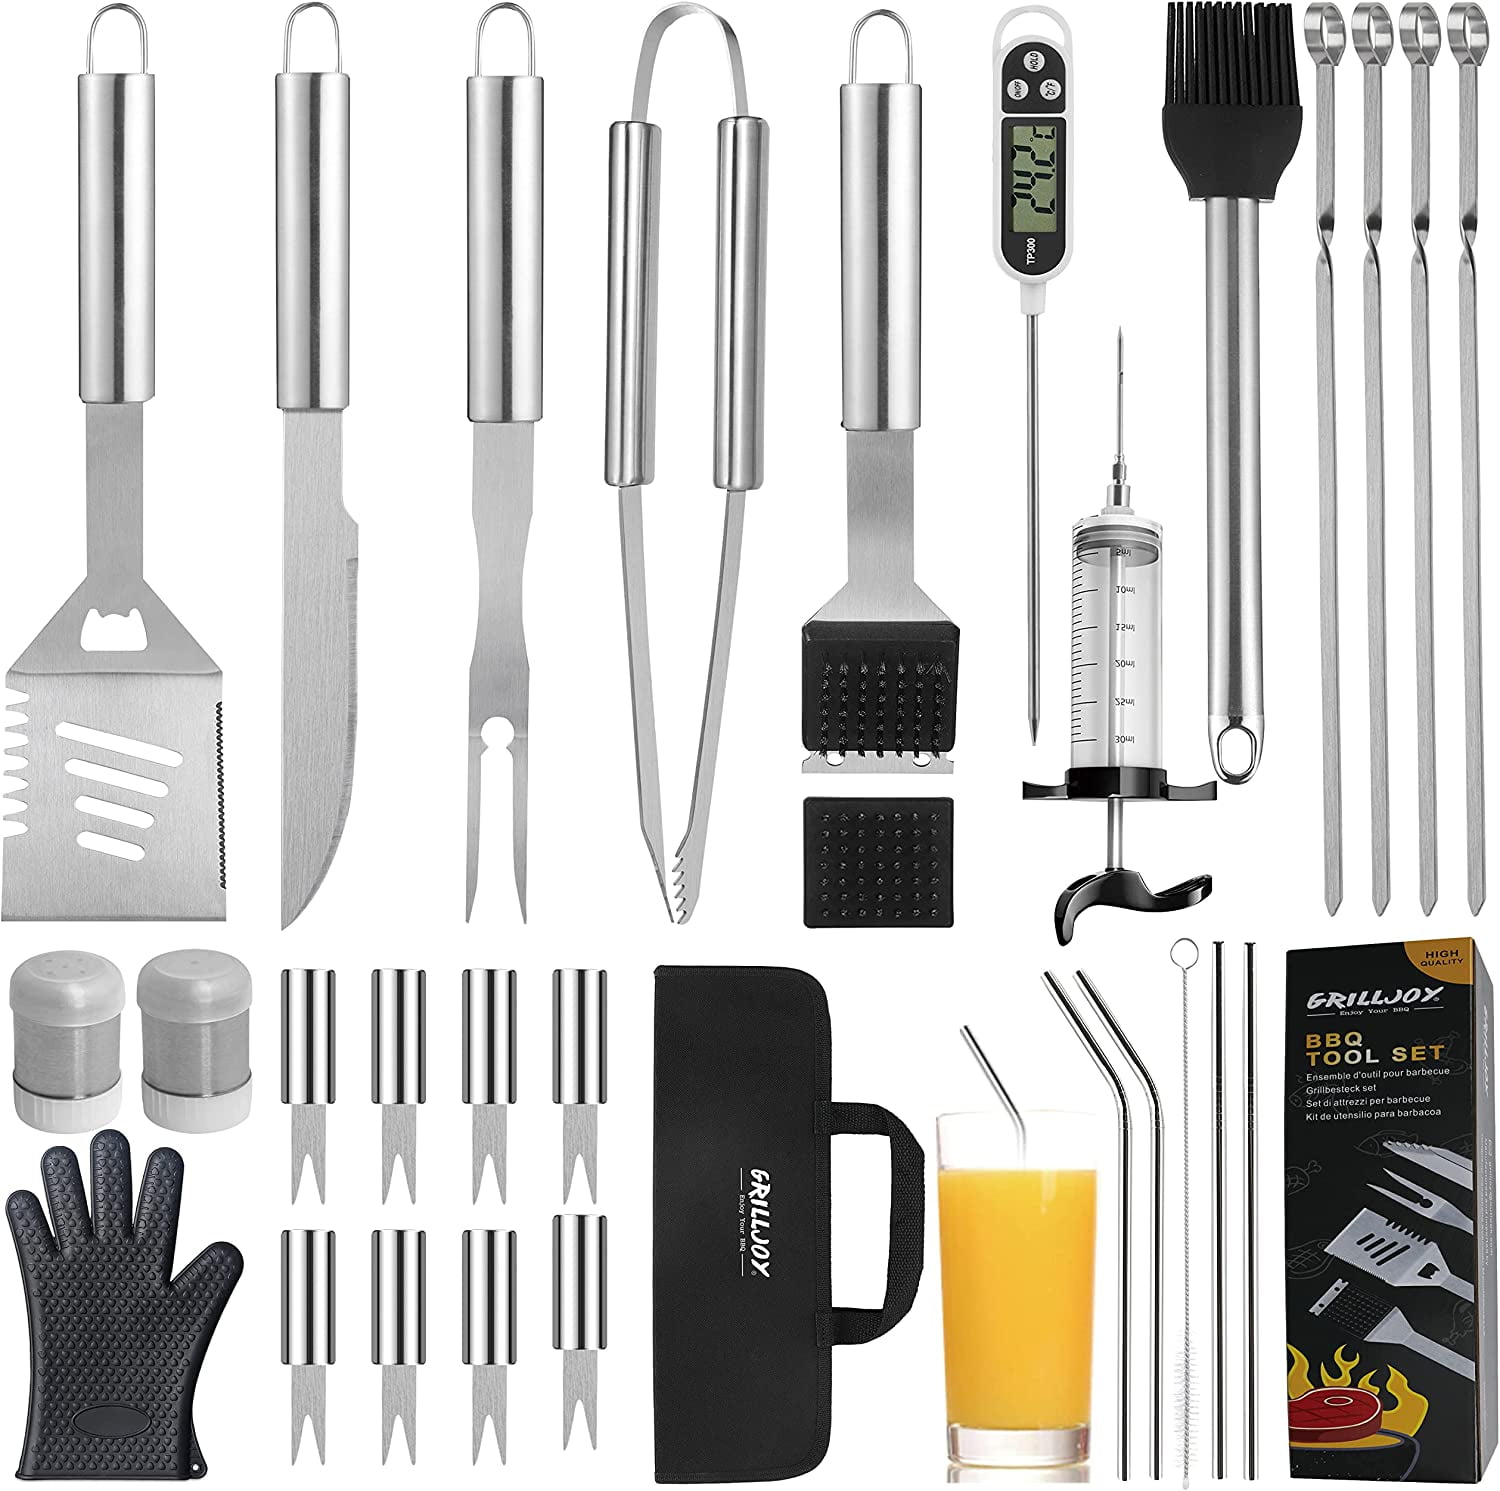 Meidong Grilling Accessories BBQ Tools Set, 9 PCS Stainless Steel Grill Kit  with Case, Great Barbecue Utensil Tool for Men, Women, Dad